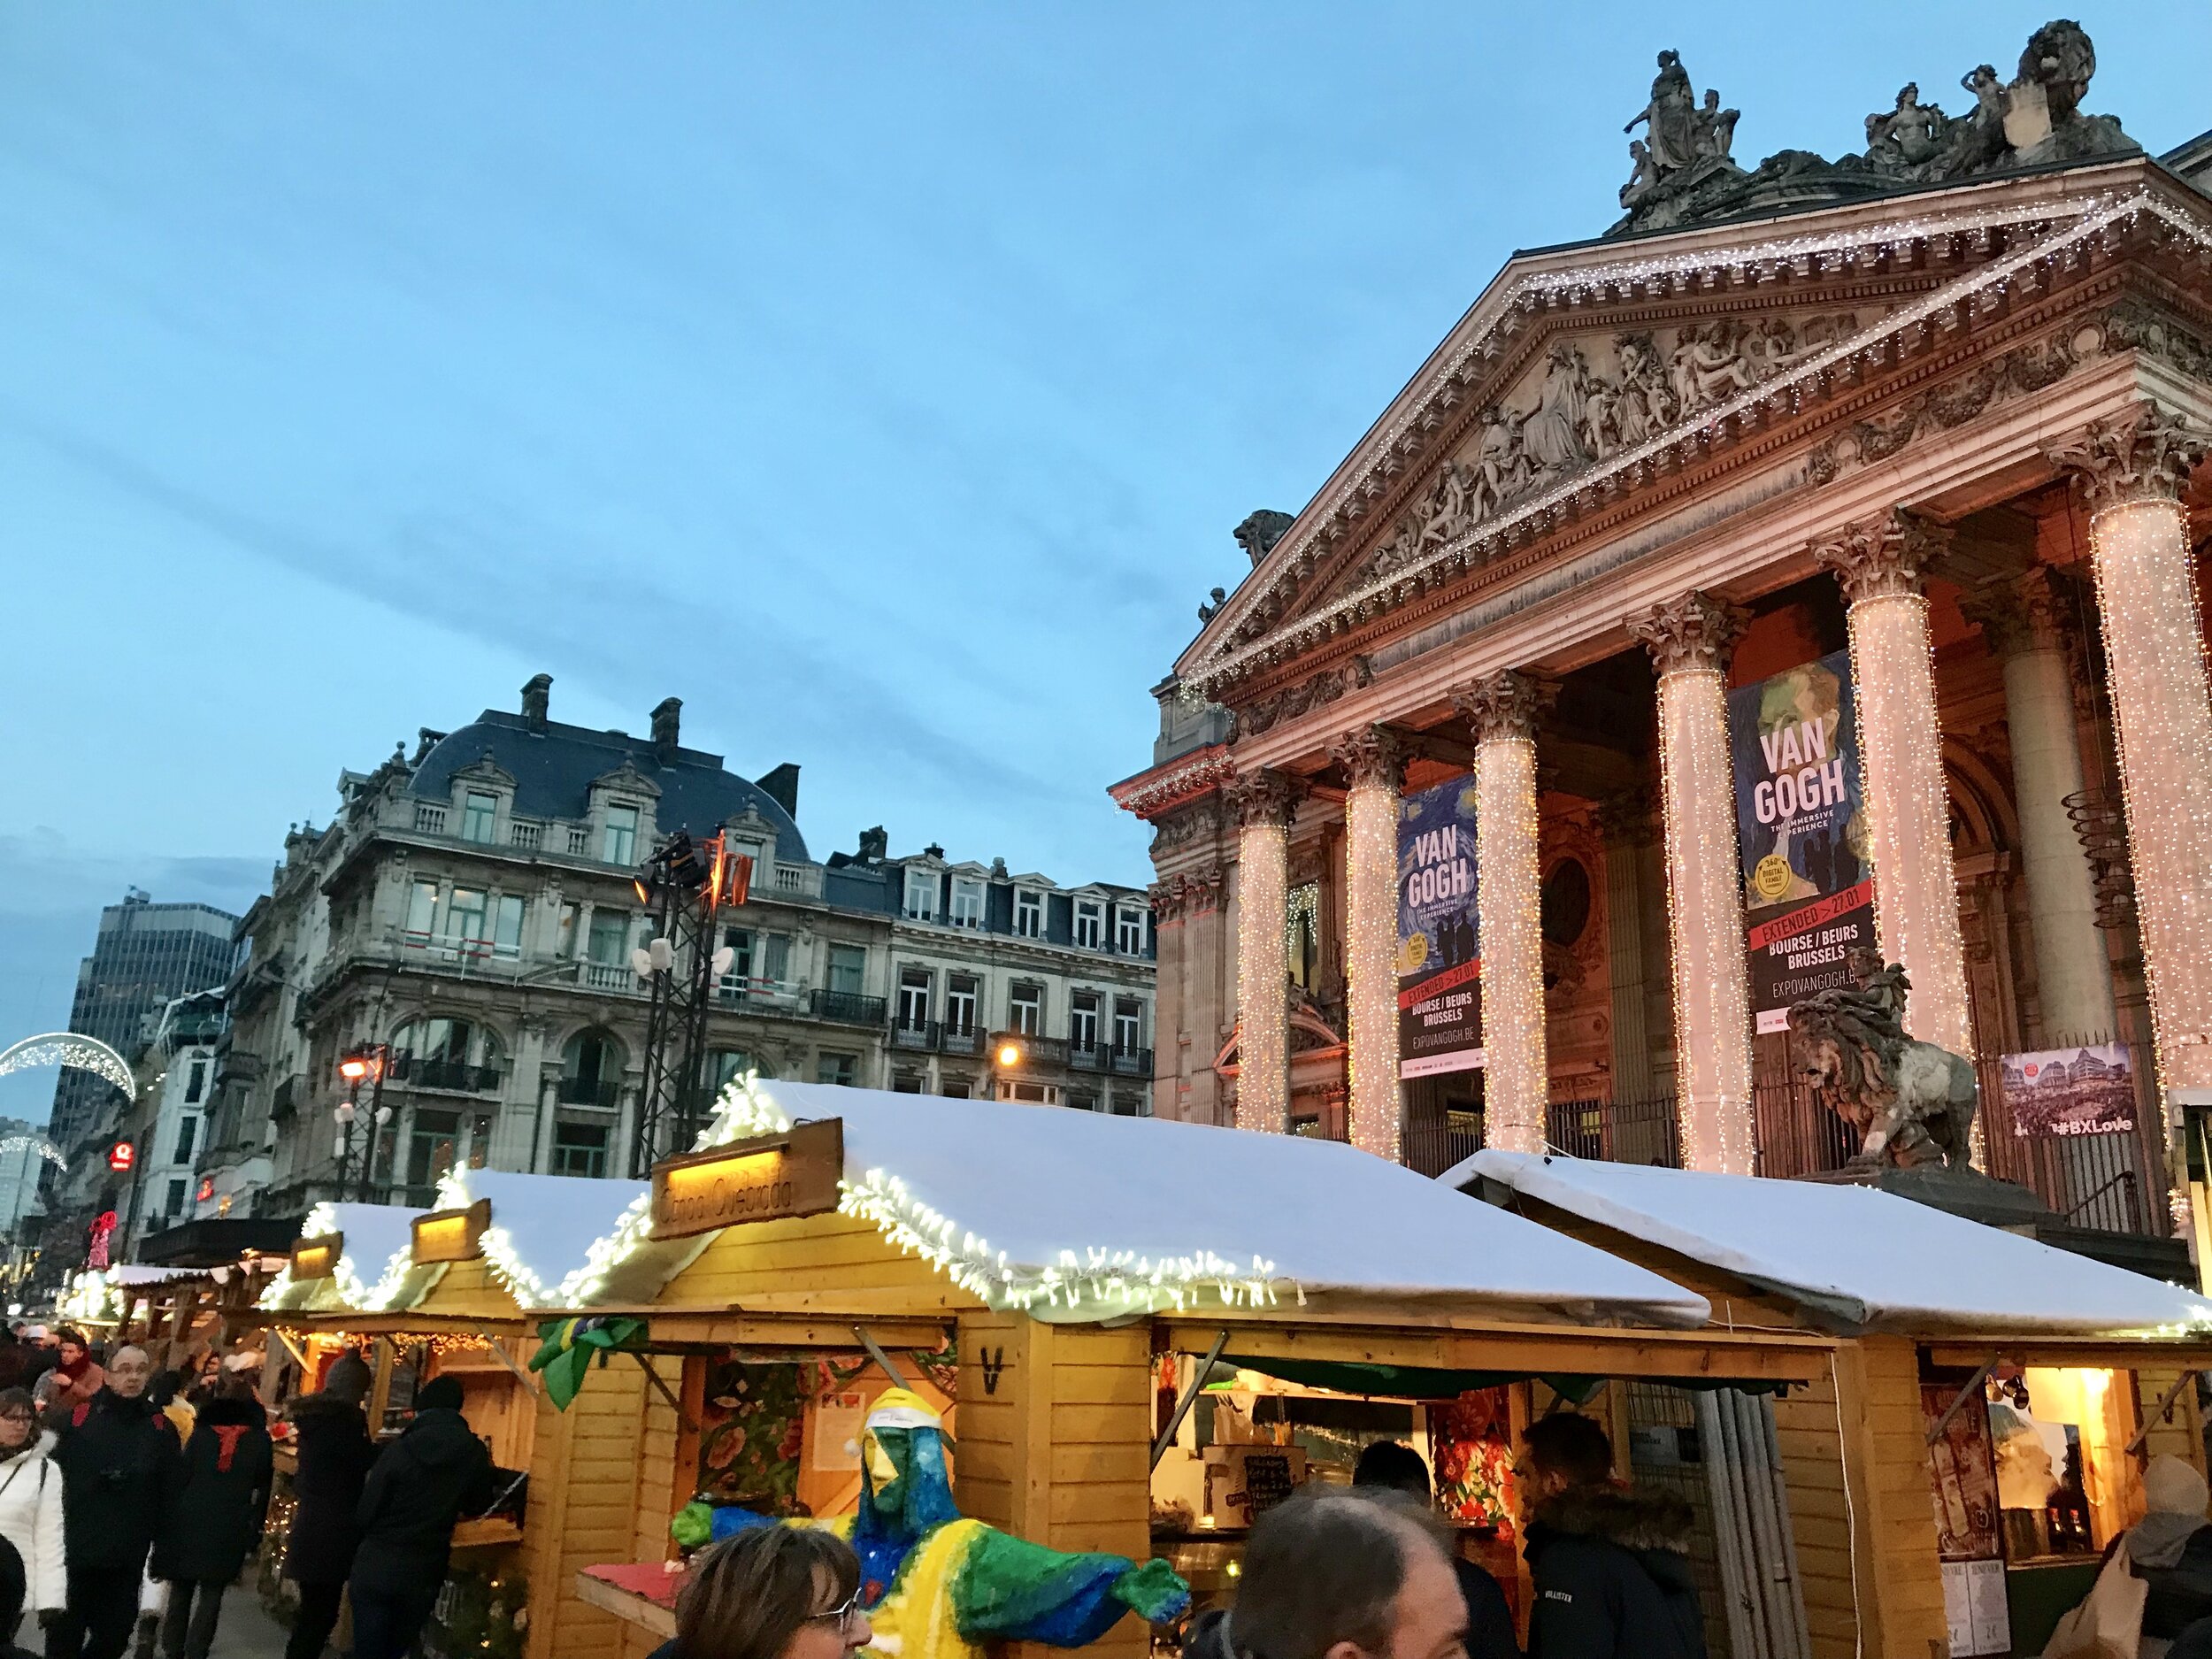 La Bourse de Bruxelles is a beautiful backdrop for a Christmas market in Belgium. The pillars are truly impressive, especially when covered in Christmas lights. 